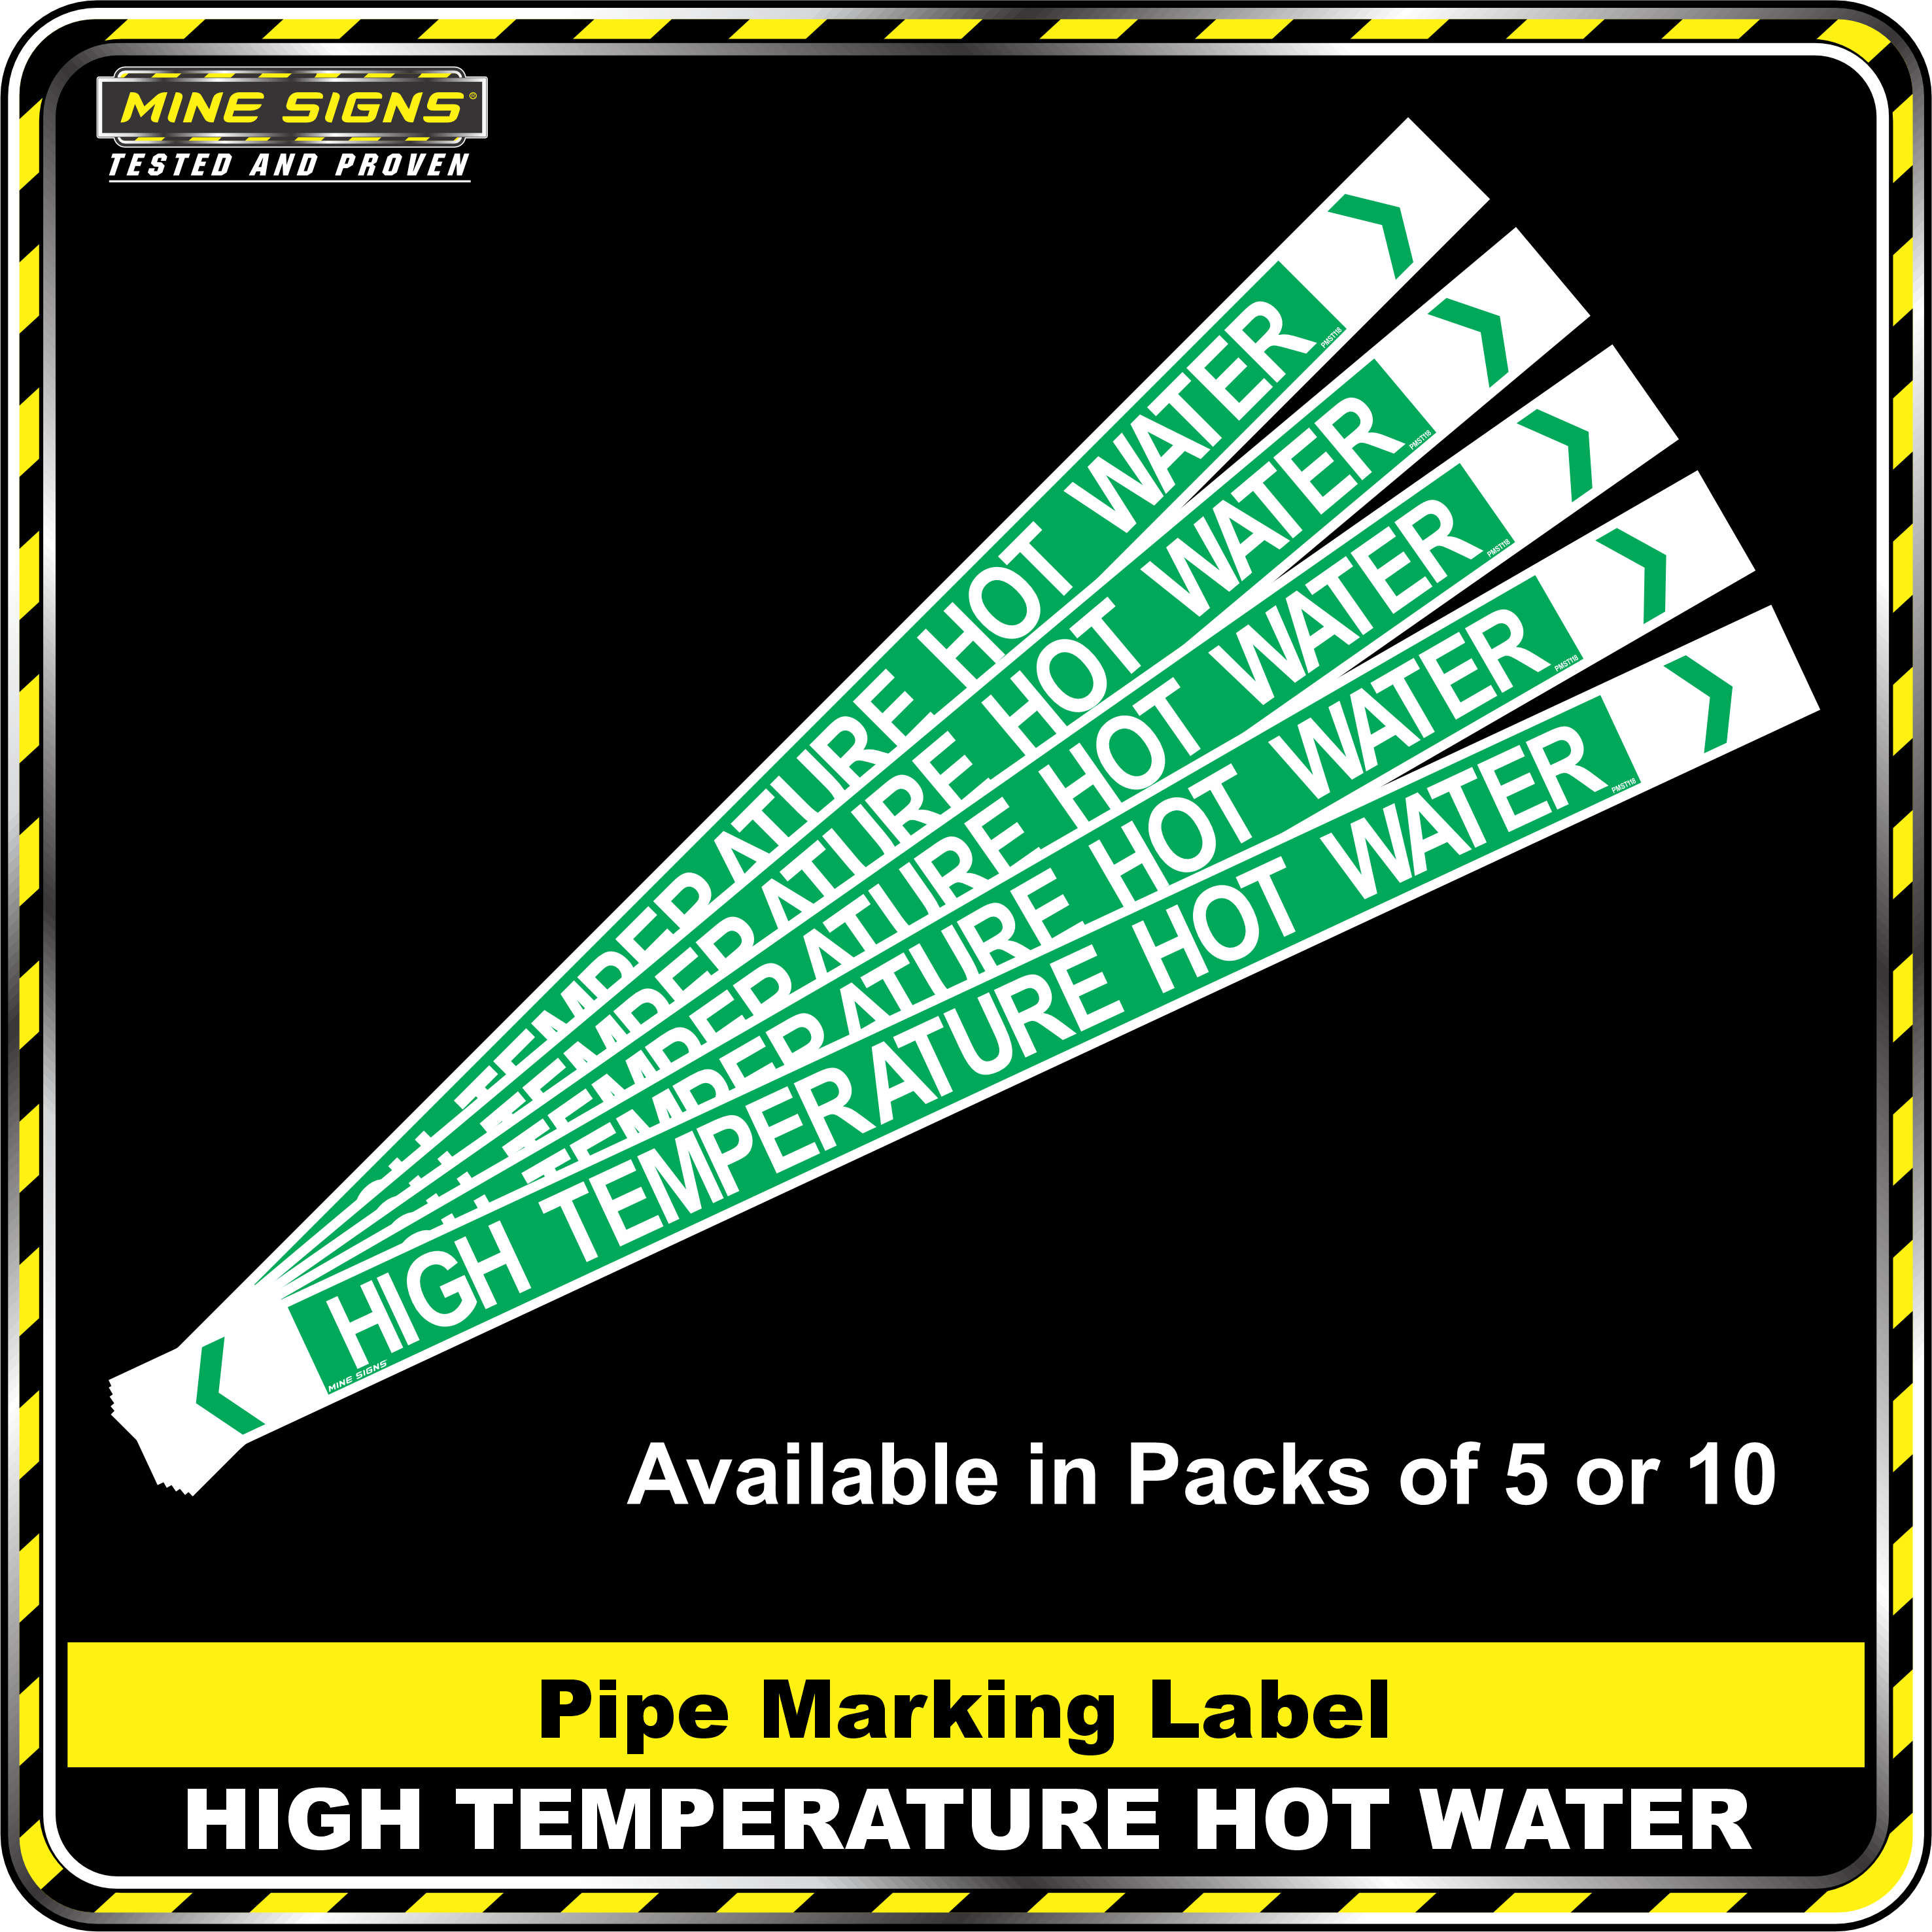 Pipe Marking Label - High Temperature Hot Water MS - Pipe Markers - High Temperature Hot Water